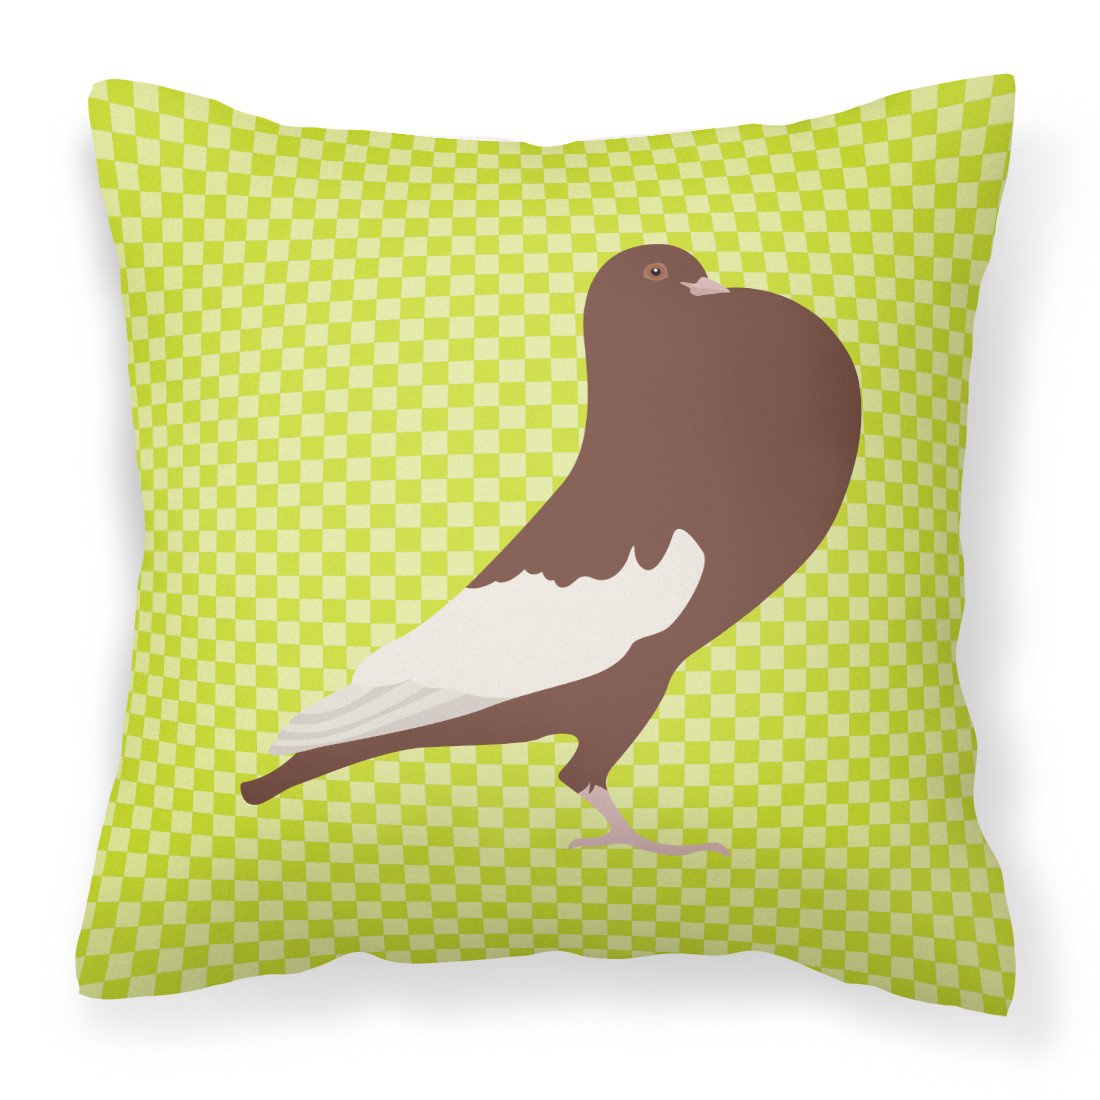 English Pouter Pigeon Green Fabric Decorative Pillow BB7780PW1818 by Caroline's Treasures